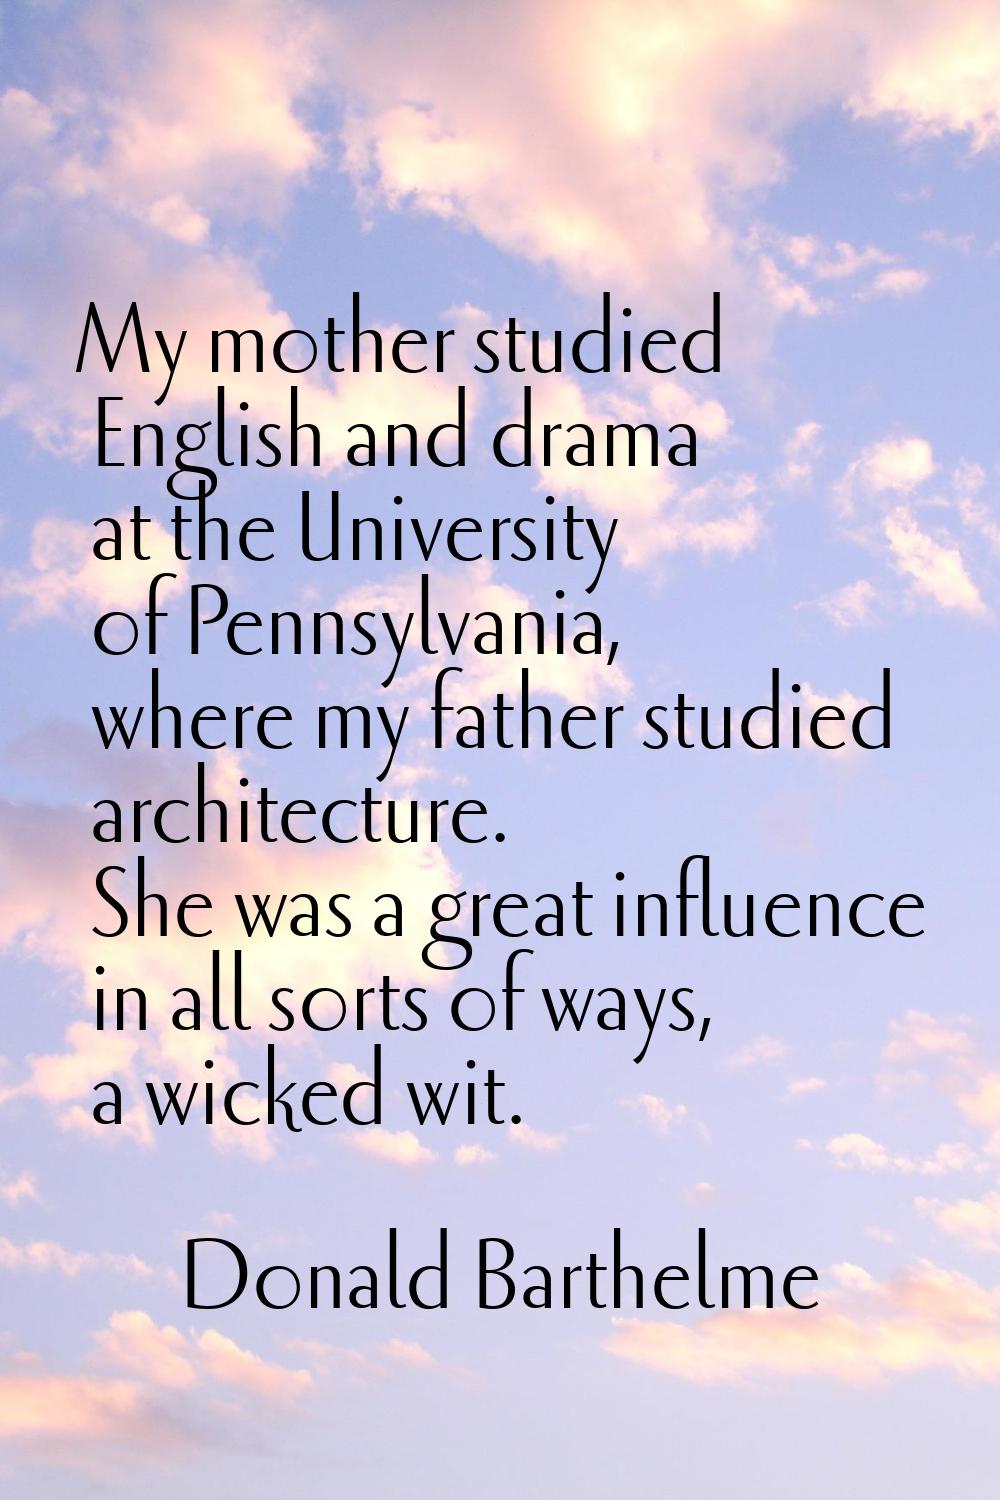 My mother studied English and drama at the University of Pennsylvania, where my father studied arch